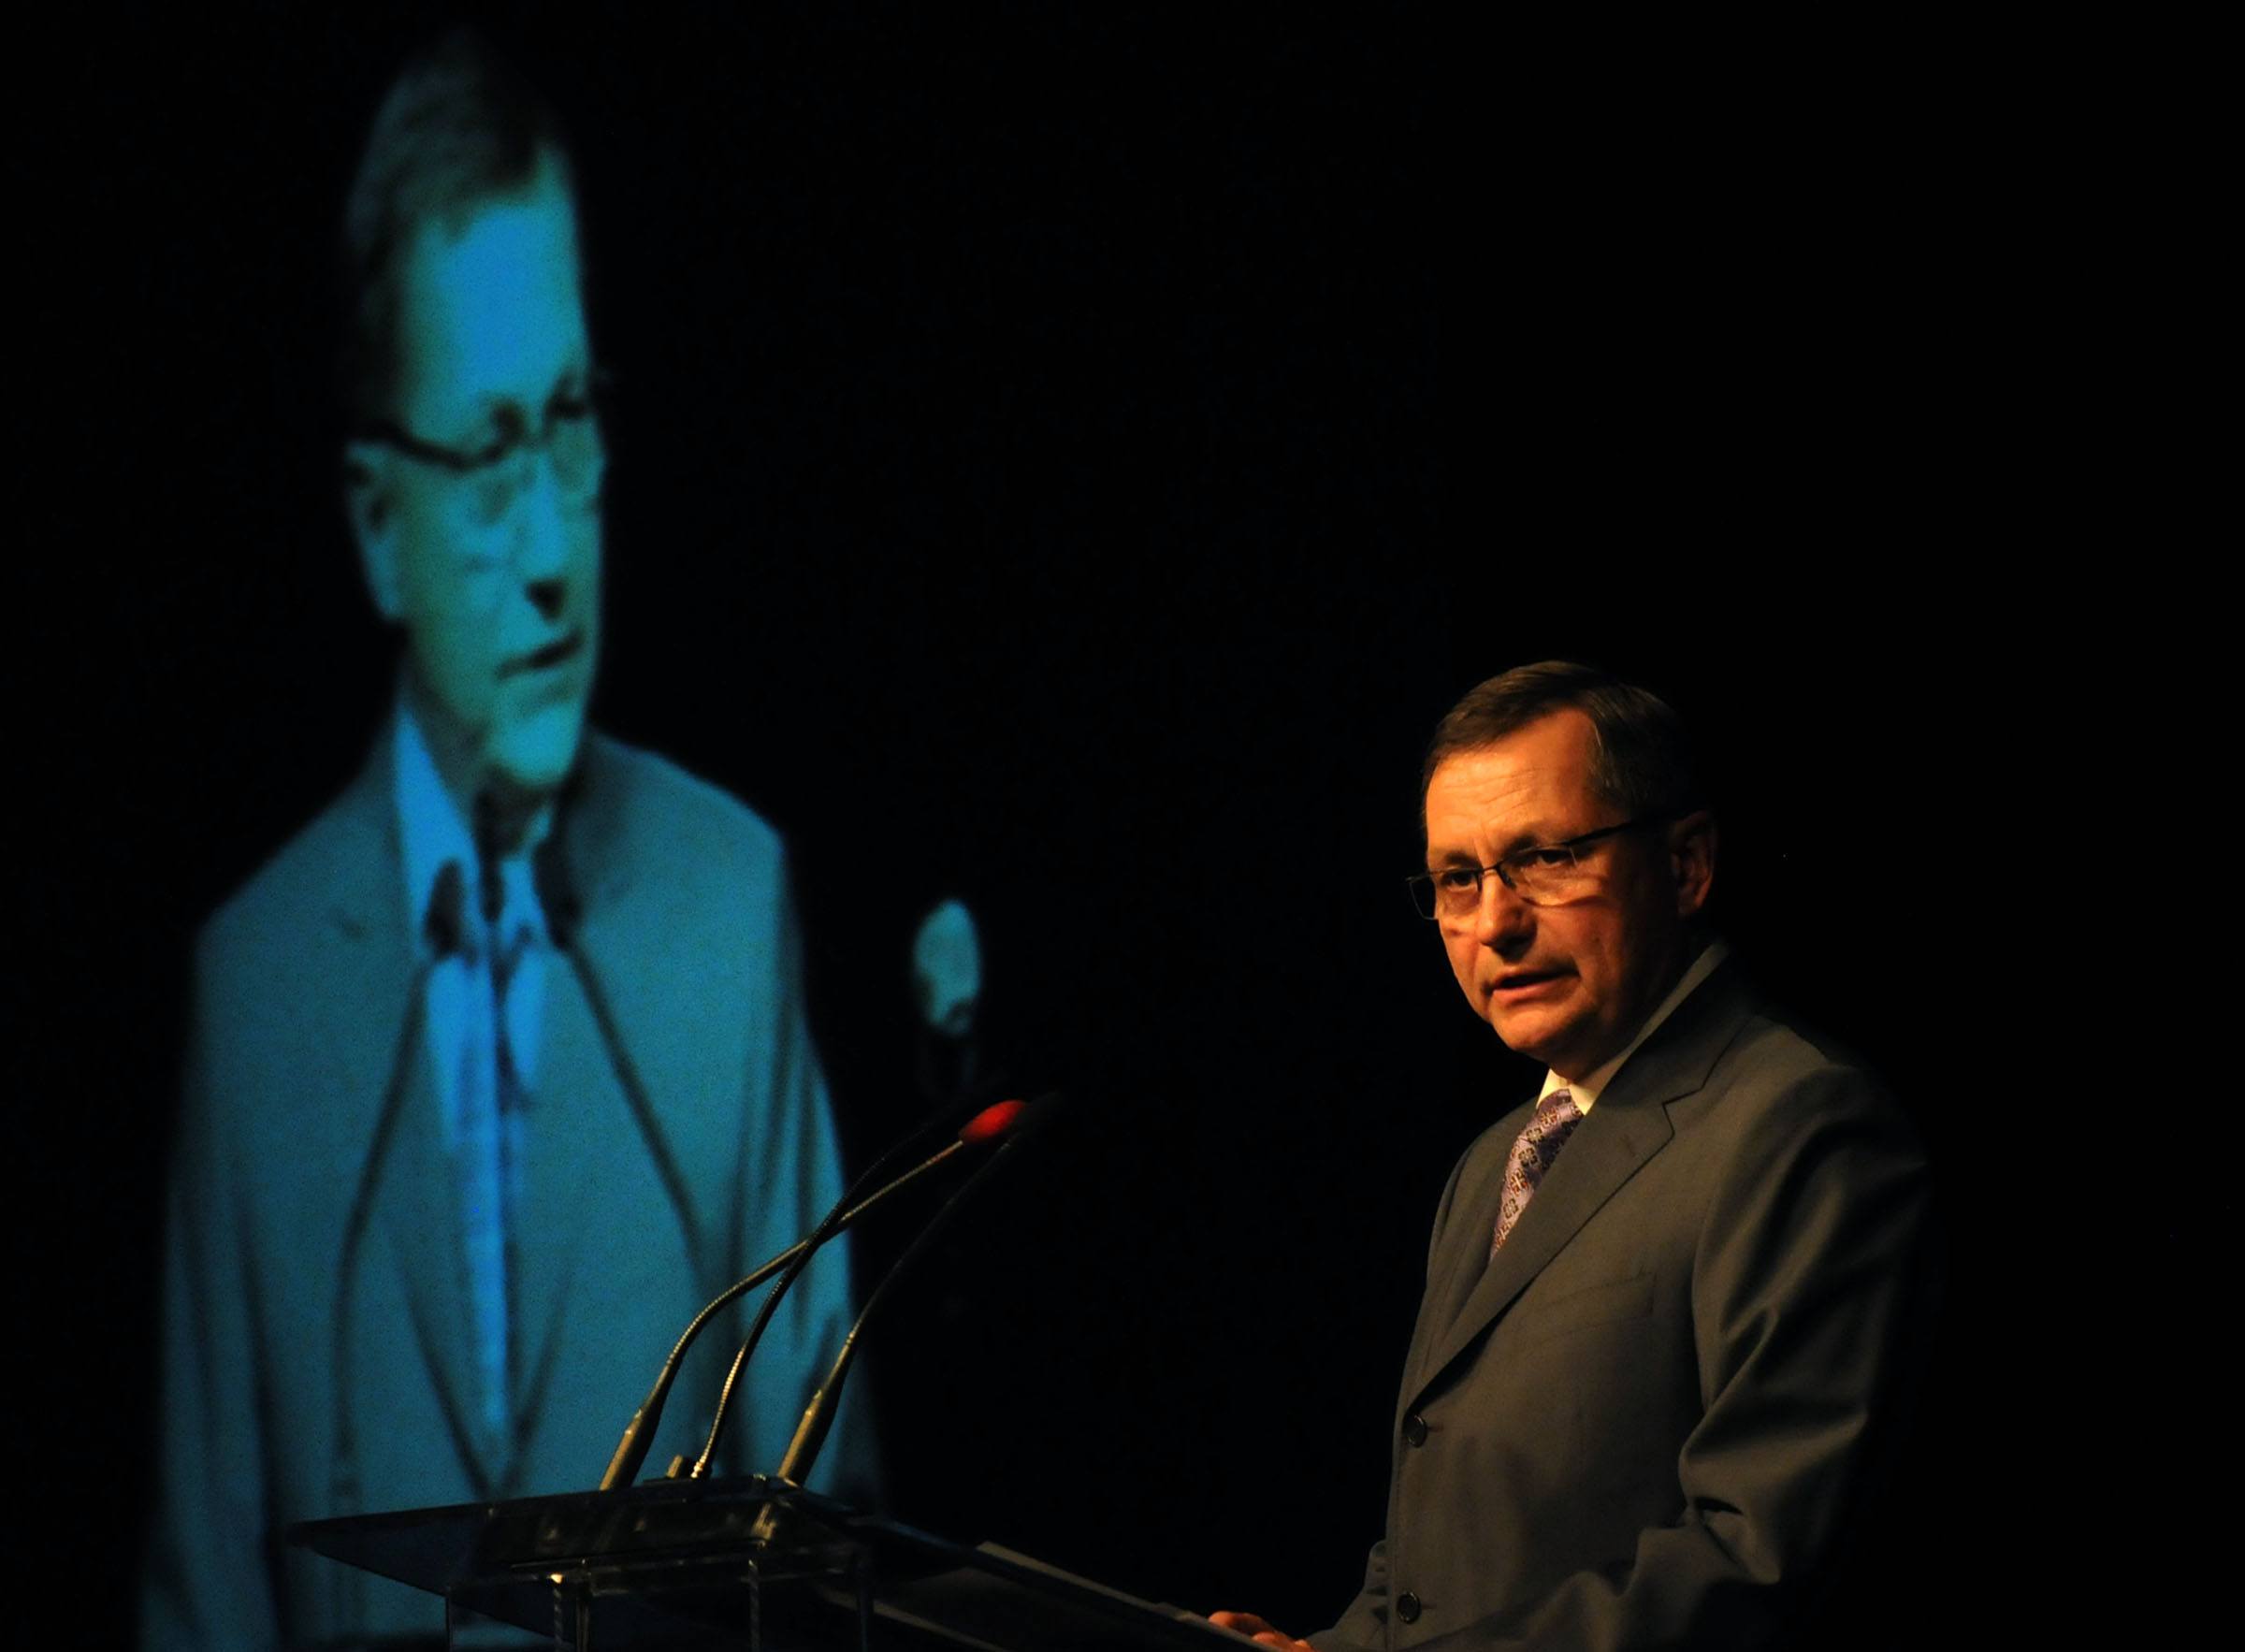 SHARING THE VISION- Premier Ed Stelmach addresses a packed house at the Capri Hotel during the Central Alberta Premier's Dinner Oct. 14.